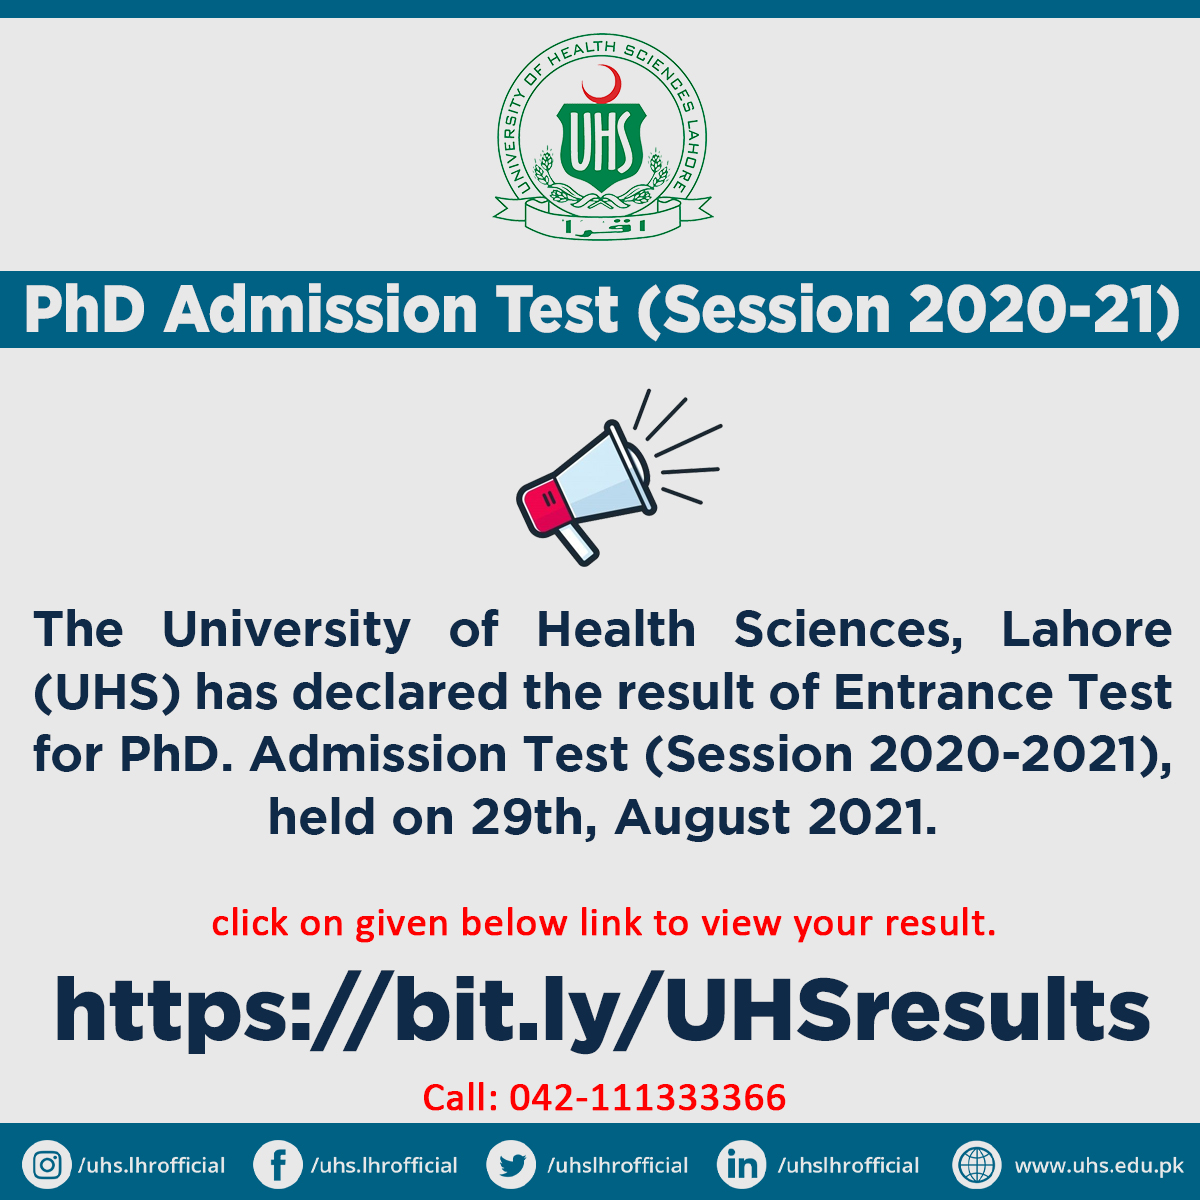 The University of Health Sciences, Lahore (UHS) has declared the result of Entrance Test for PhD. Admission Test (Session 2020-2021), held on 29th, August 2021. Click here to view results: bit.ly/UHSresults